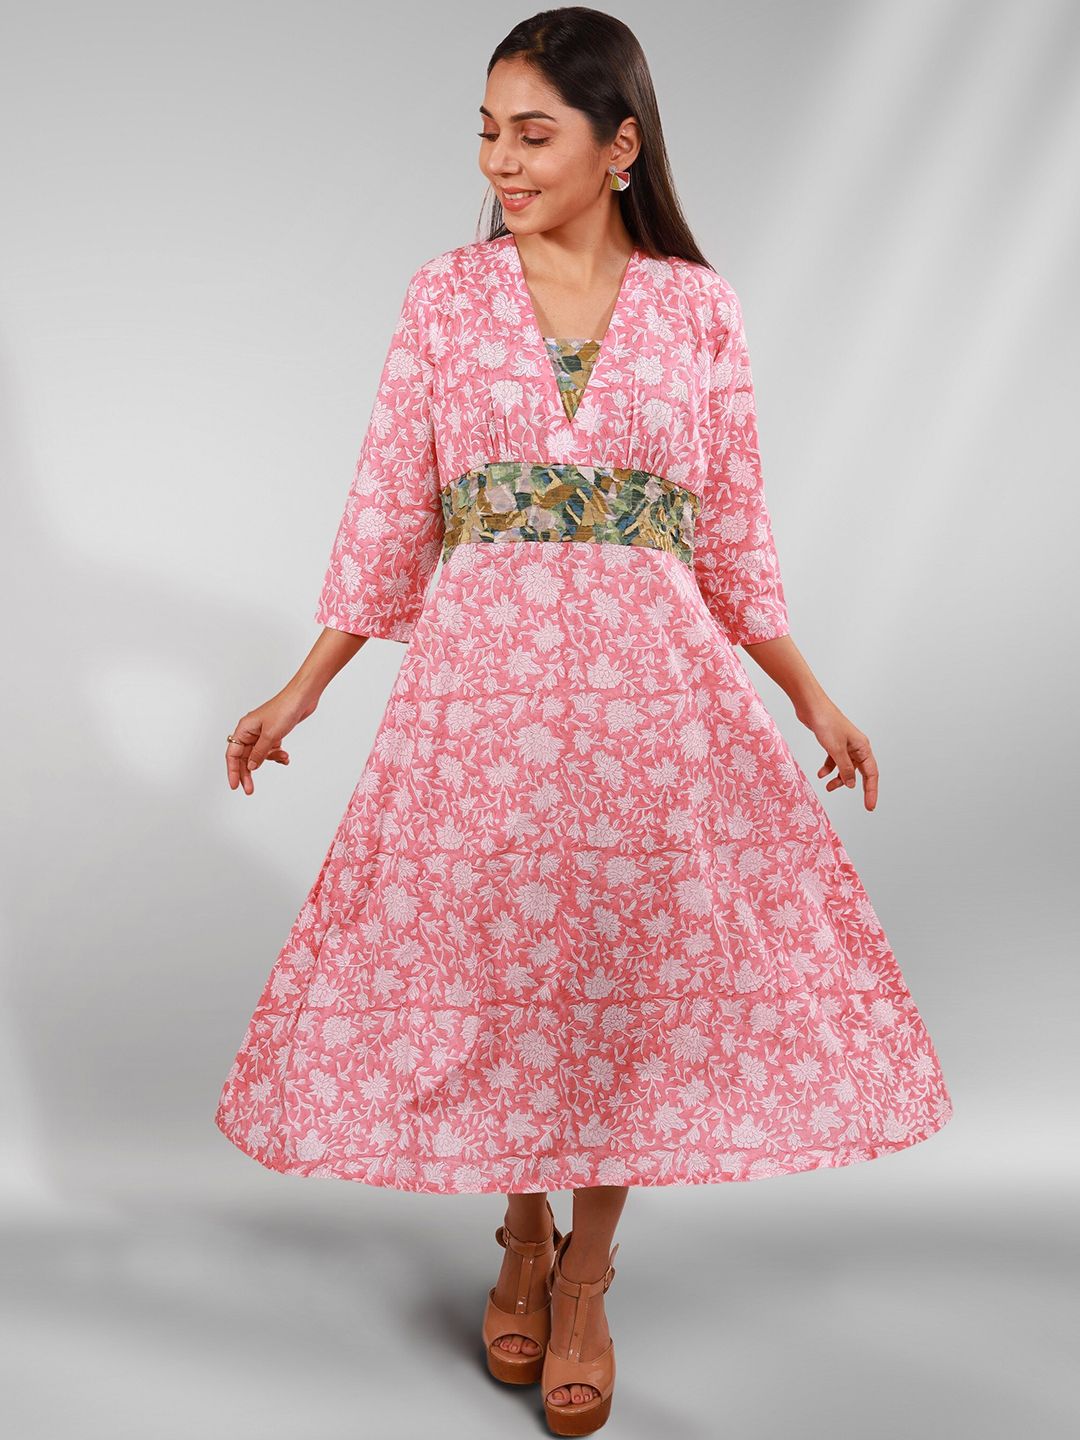 Orbbaan Pink & White Floral Cotton Midi Dress Price in India